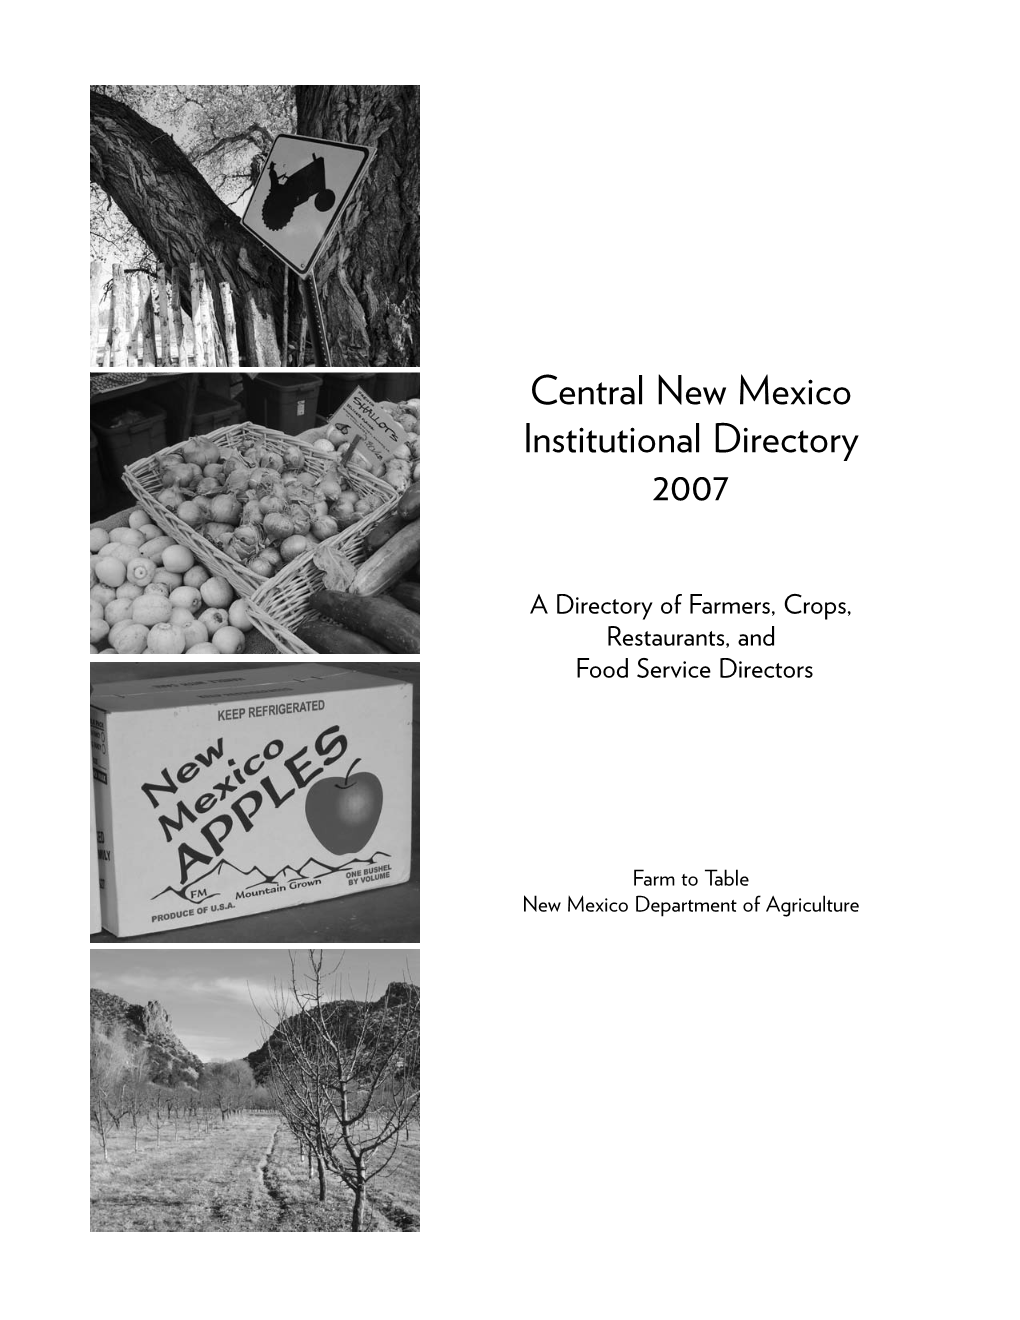 Central New Mexico Institutional Directory 2007